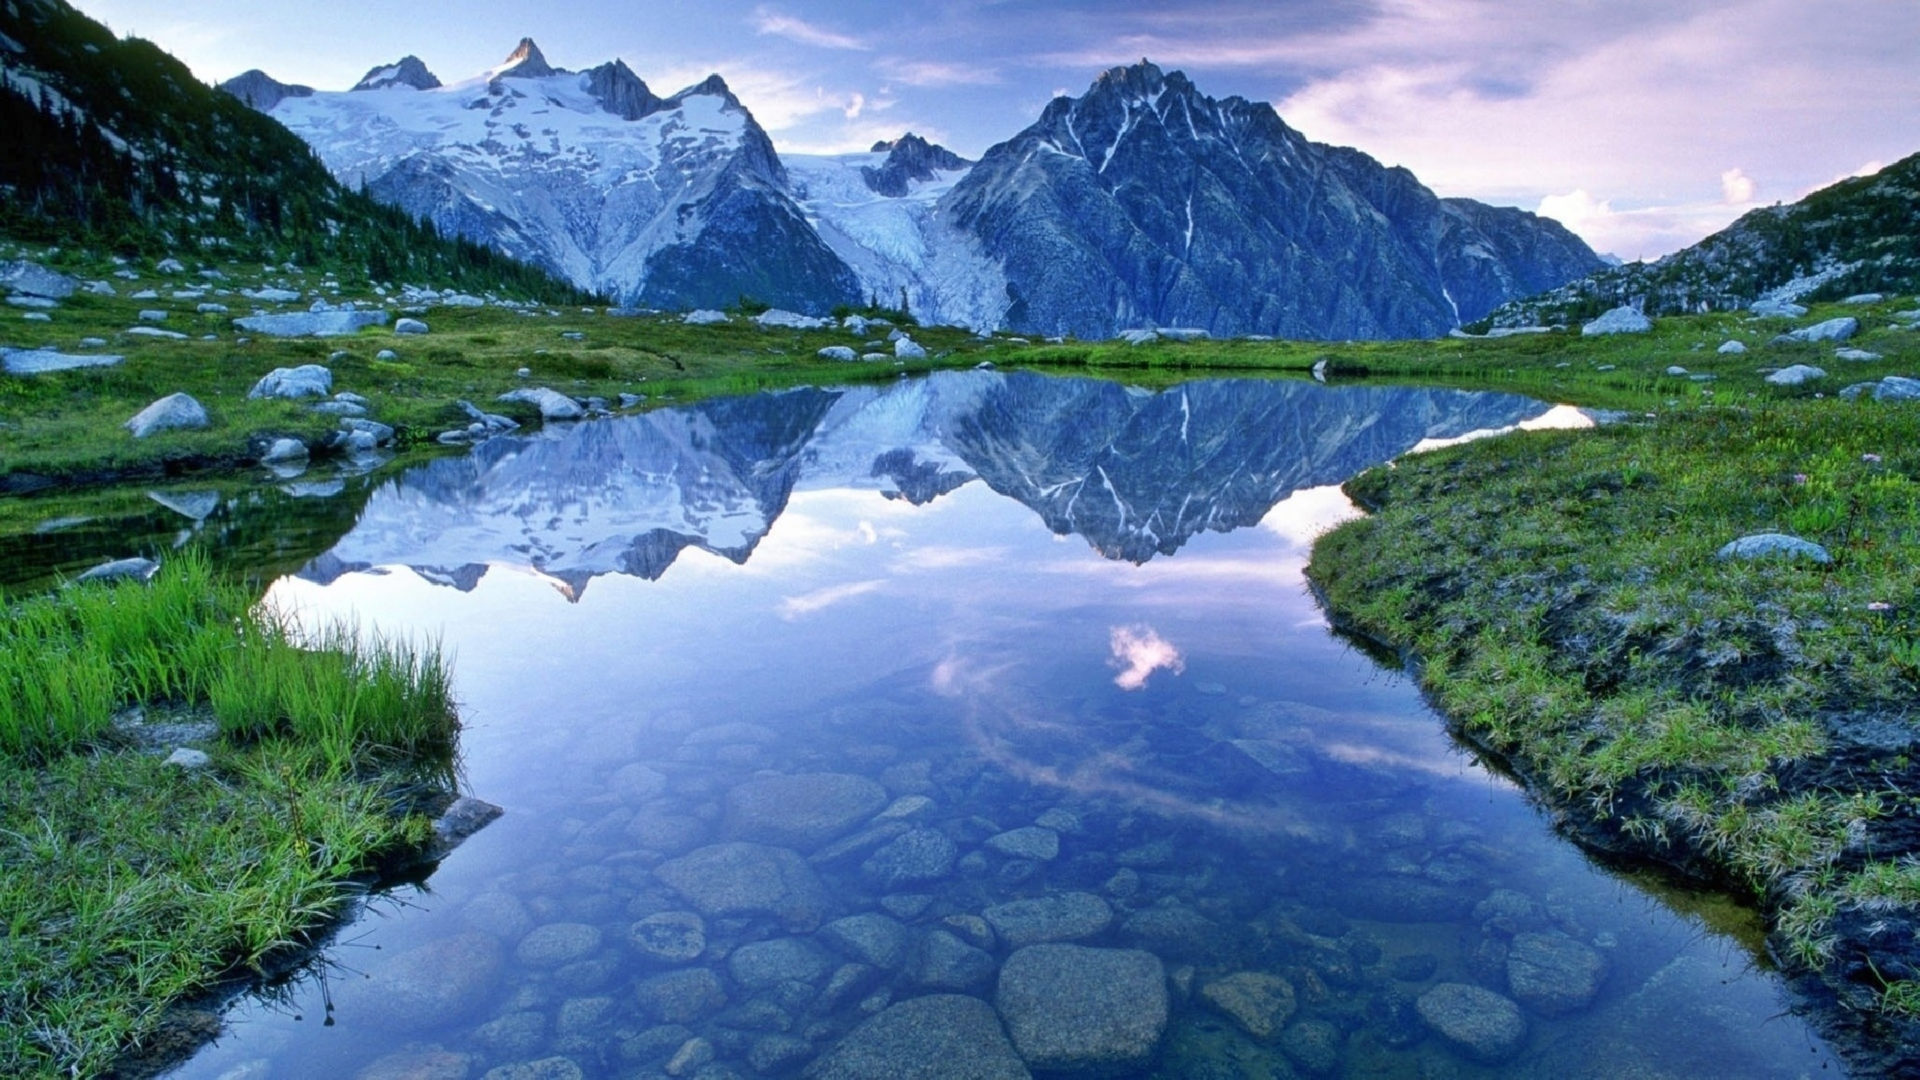 Beautiful Landscape HD Wallpaper Water Mountains With Snow Sky Clouds Reflection, Wallpaper13.com